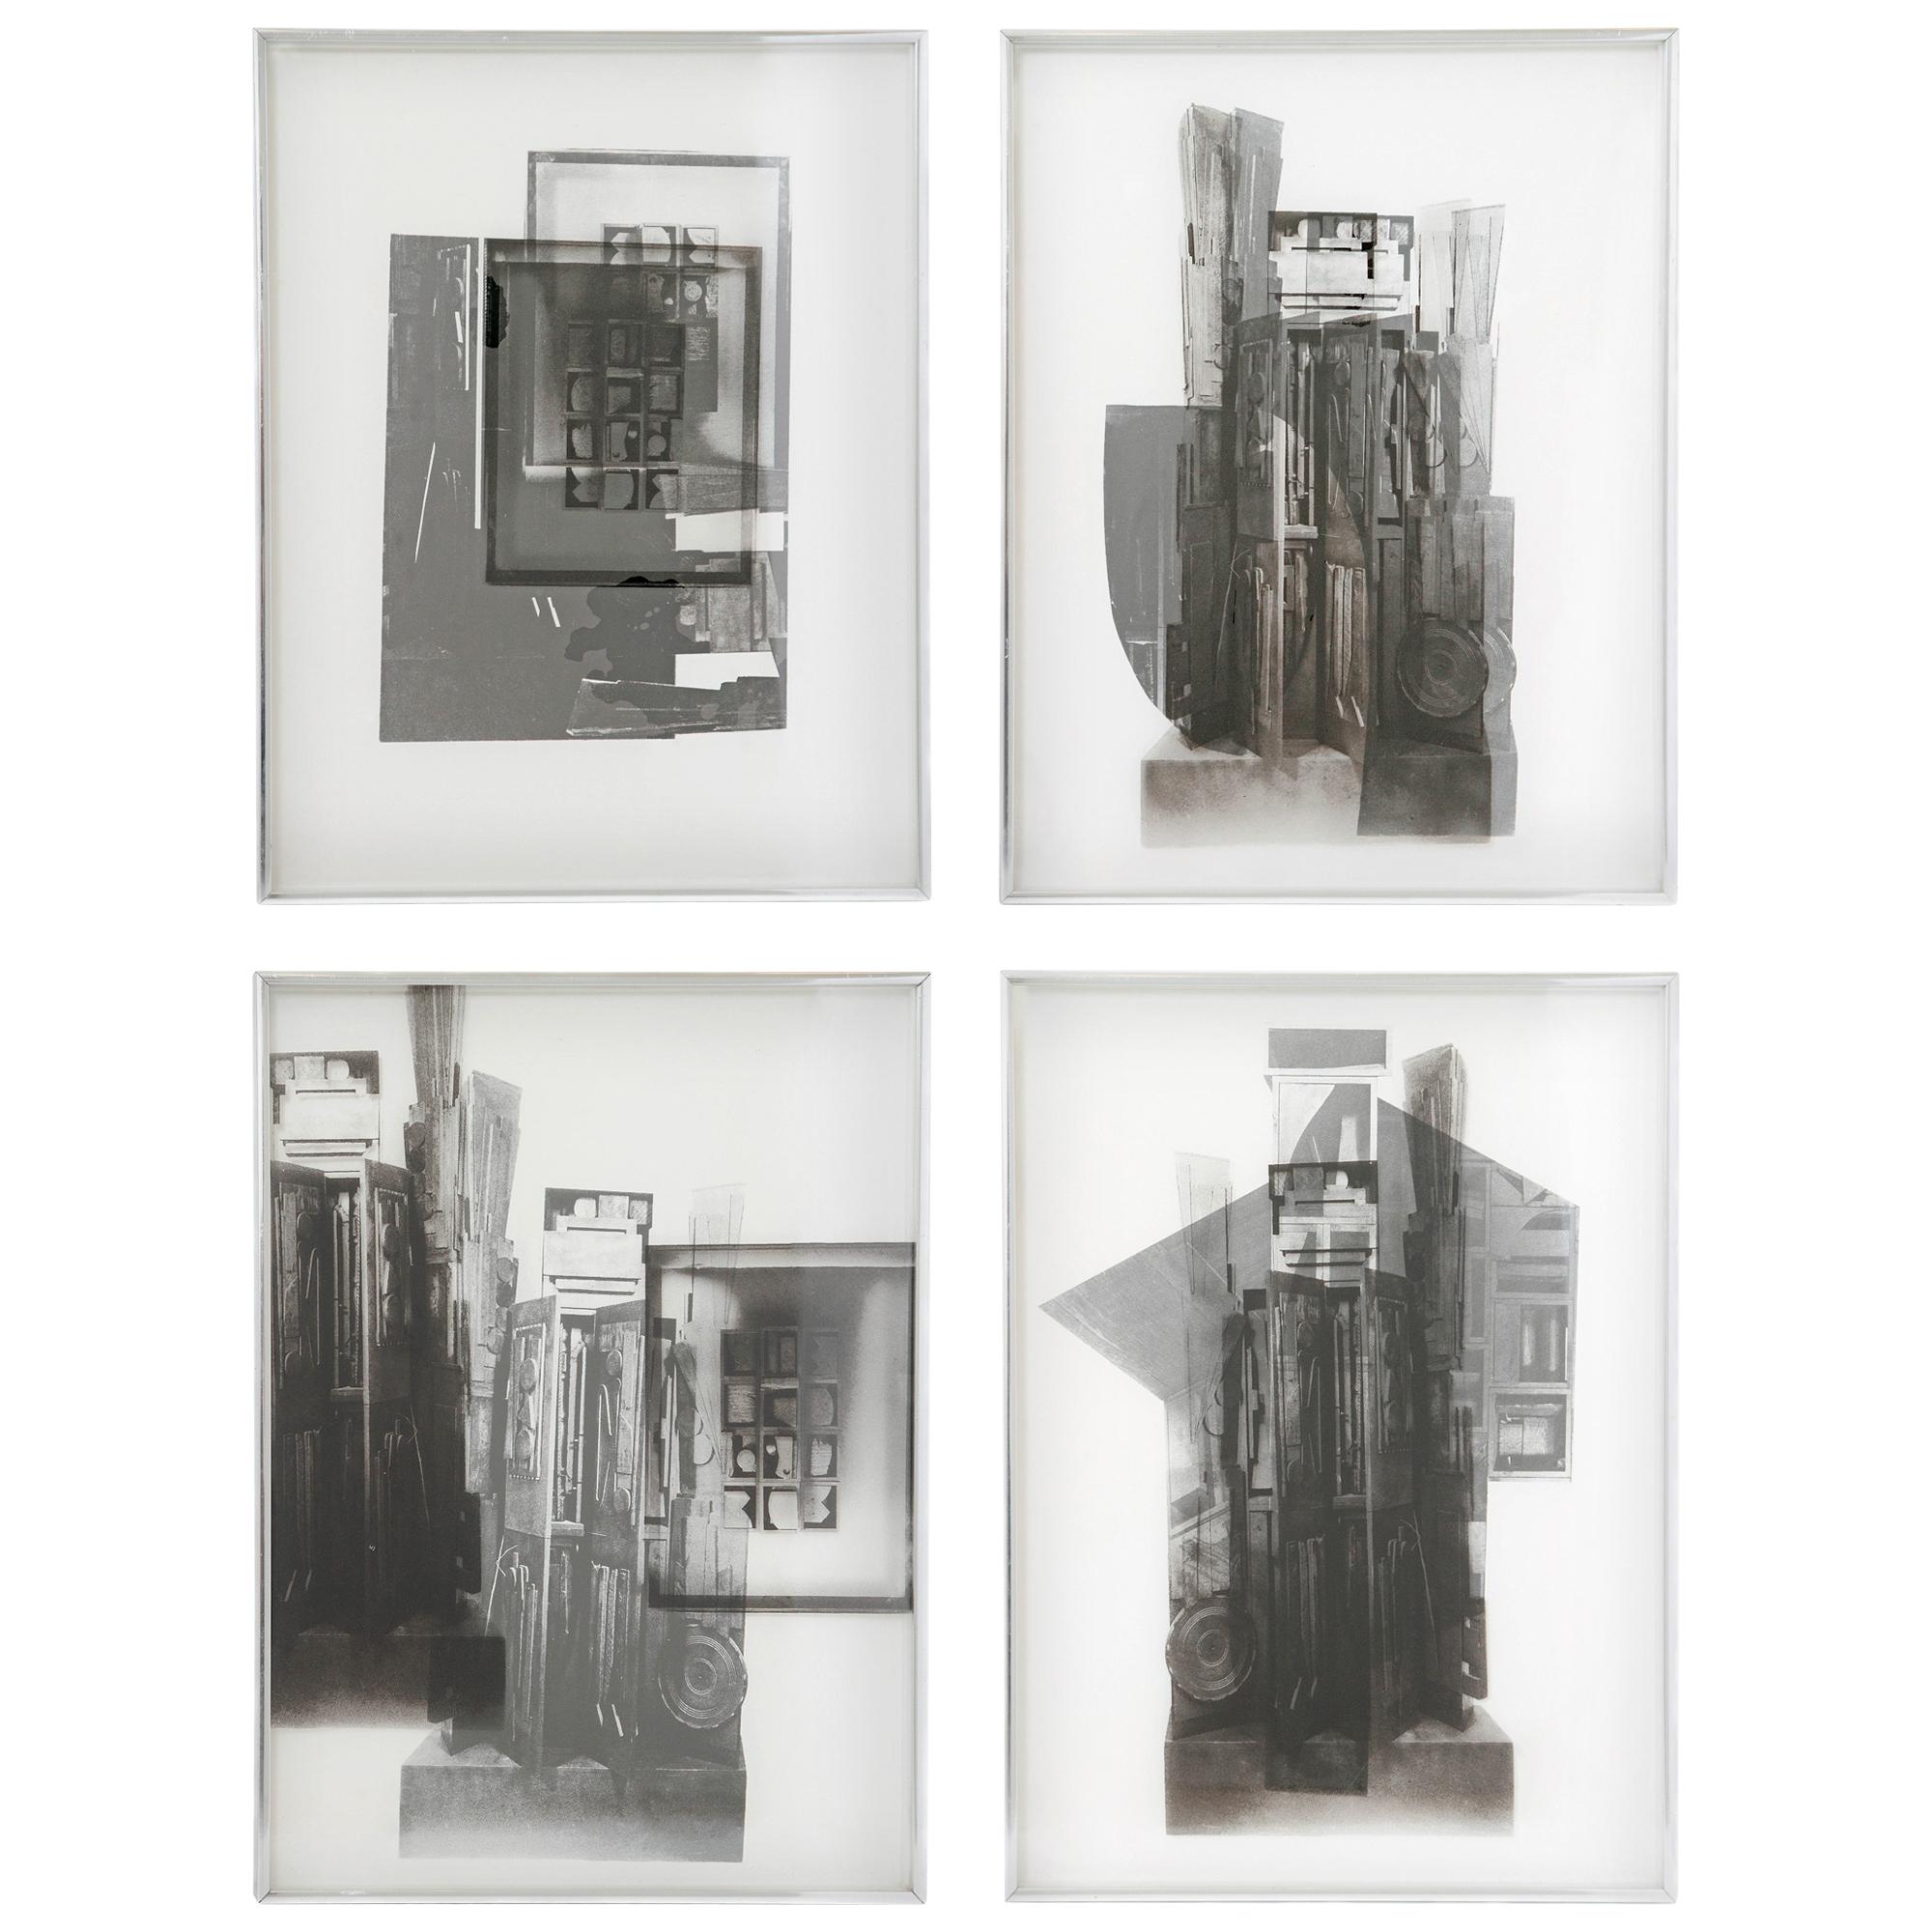 Louise Nevelson "Facades" Four Works